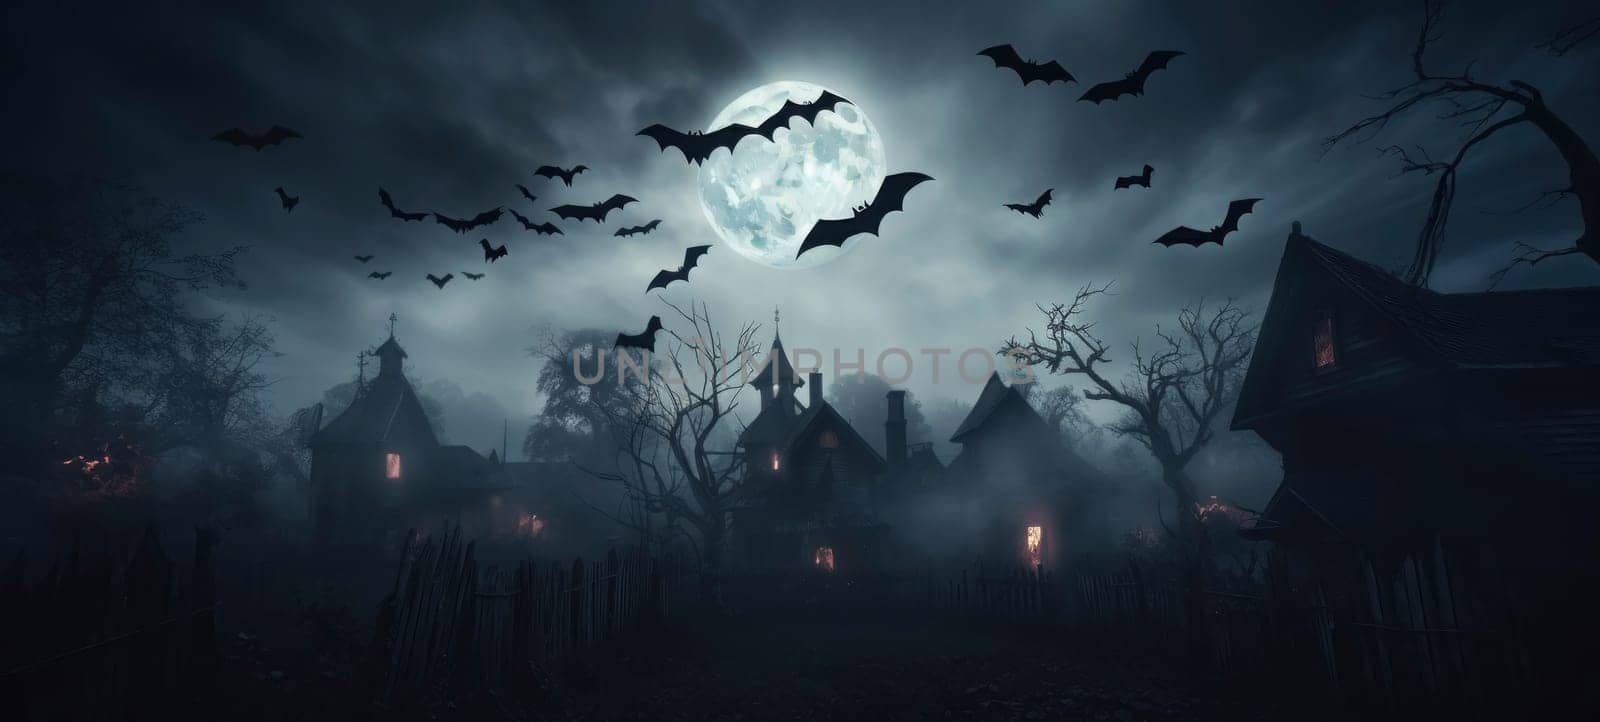 Gothic Village with Bats under Full Moon by andreyz